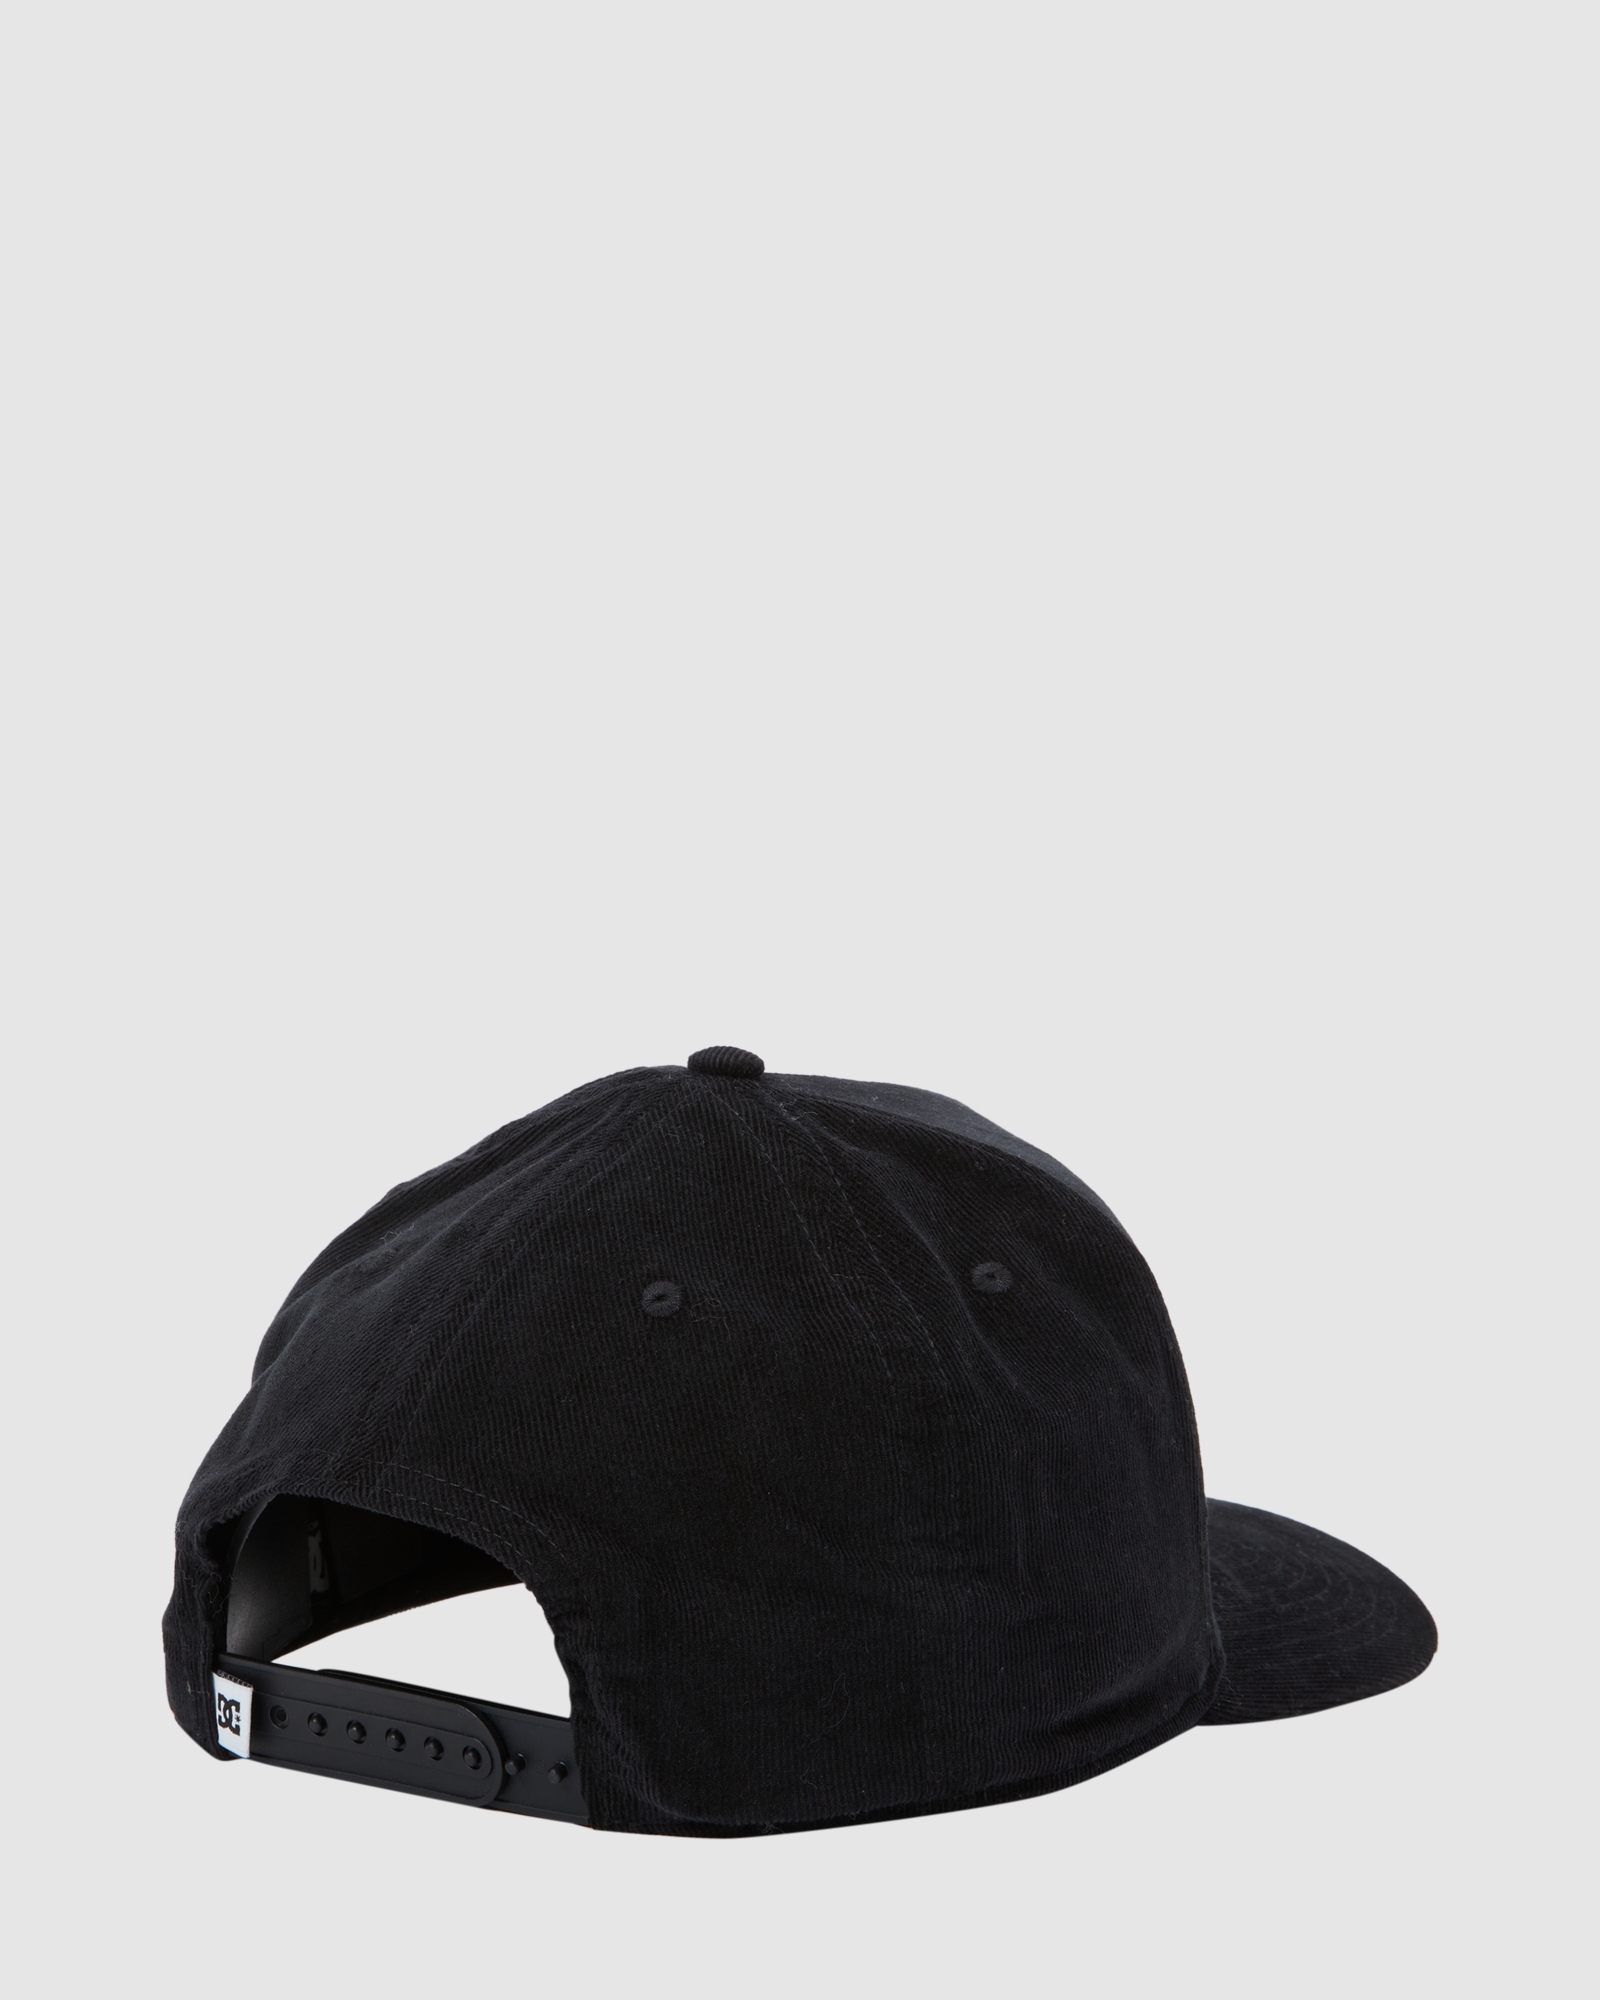 Expo Dc | Hat - Shoes SurfStitch Dc Snapback Black